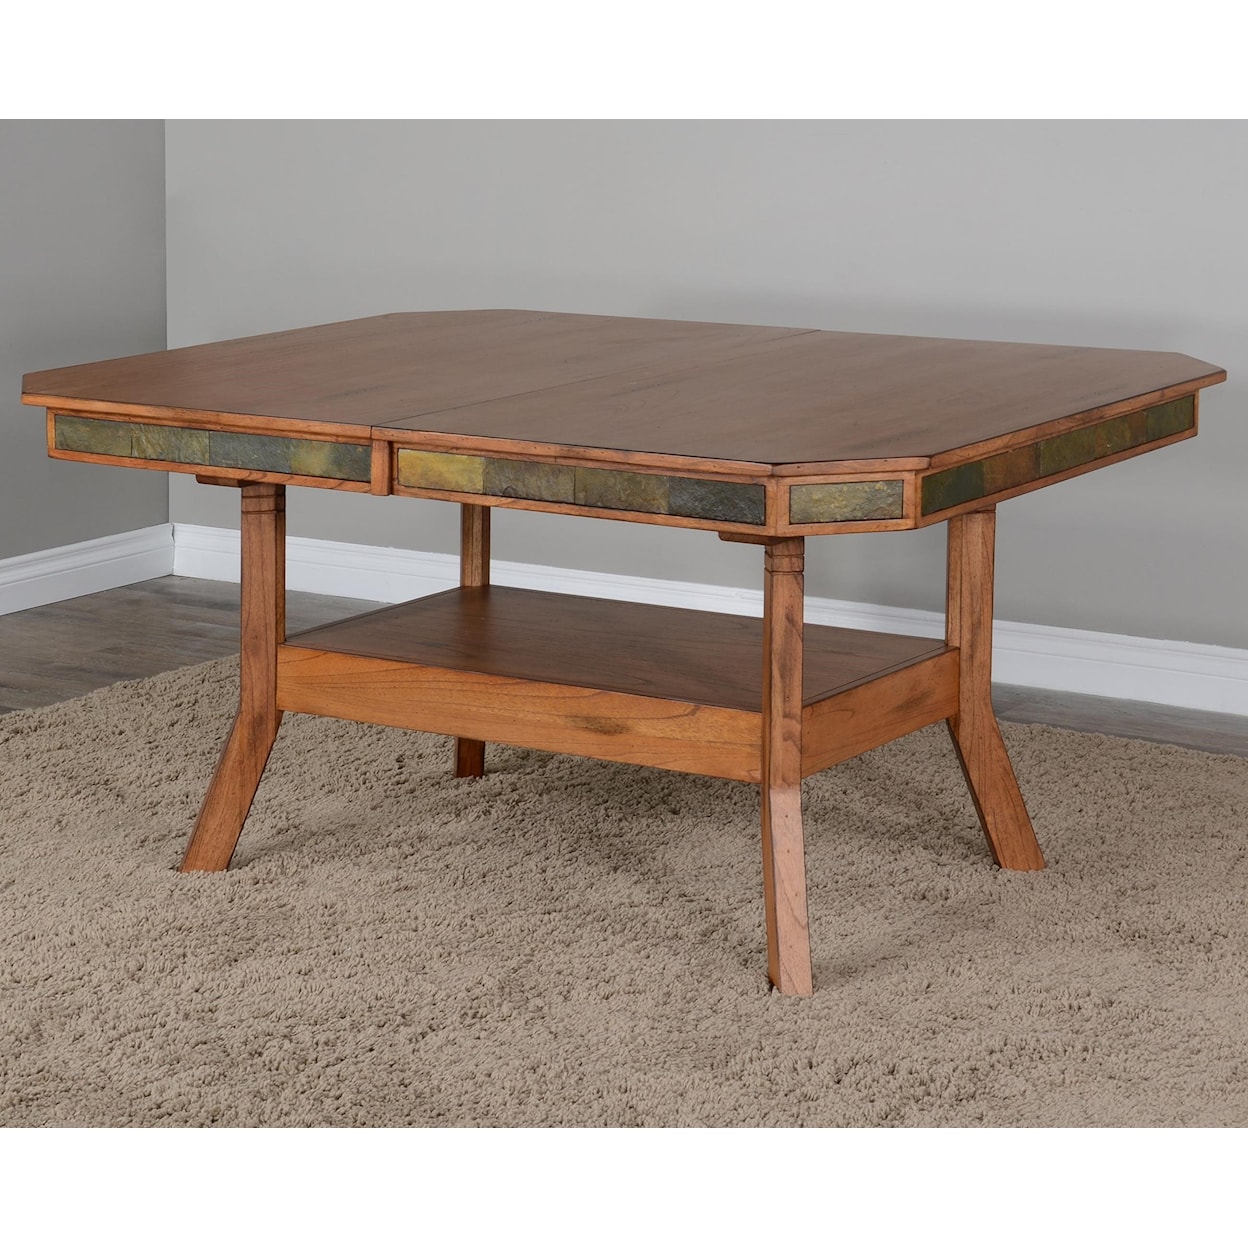 Sunny Designs Sedona 2 Dual Height Dining Table w/ 2 Leaves